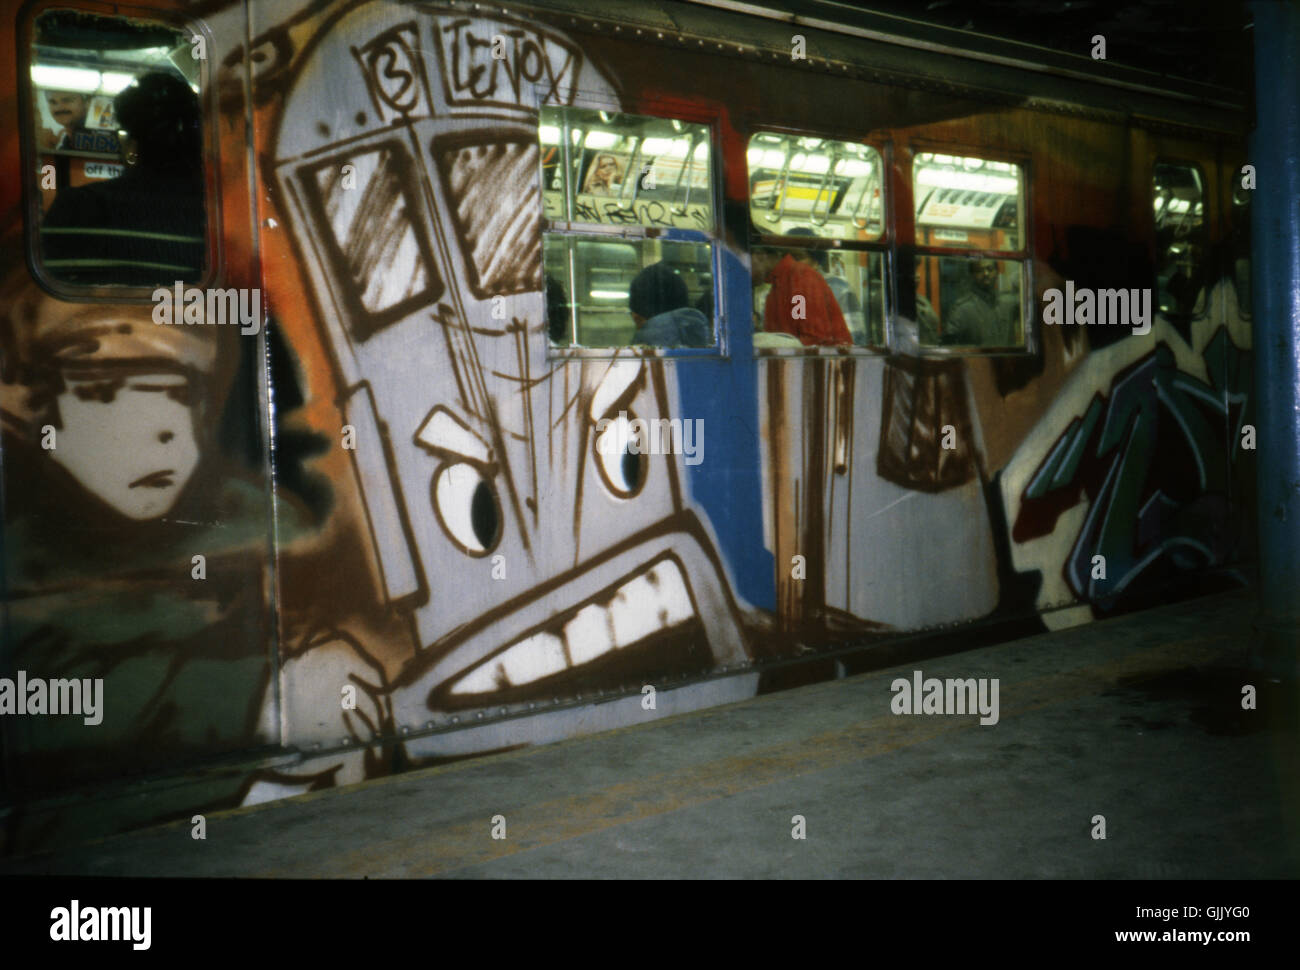 Illegal graffiti on a subway car in New York City. The mural was done by the subway artist Duster. Stock Photo